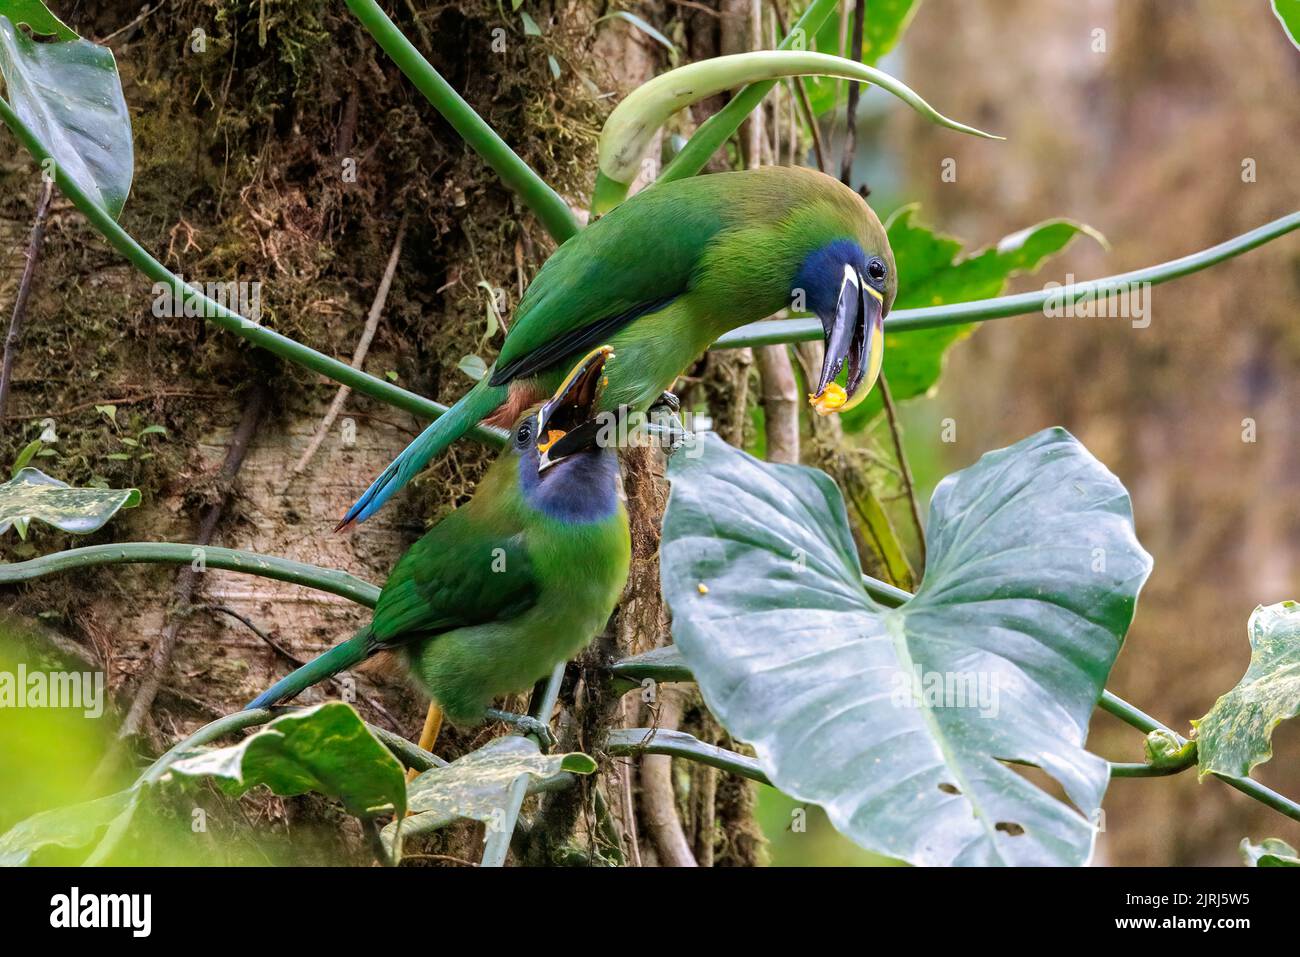 Emerald toucanets (Aulacorhynchus prasinus) perching on a branch in Santa Elena cloud forest, Costa Rica Stock Photo